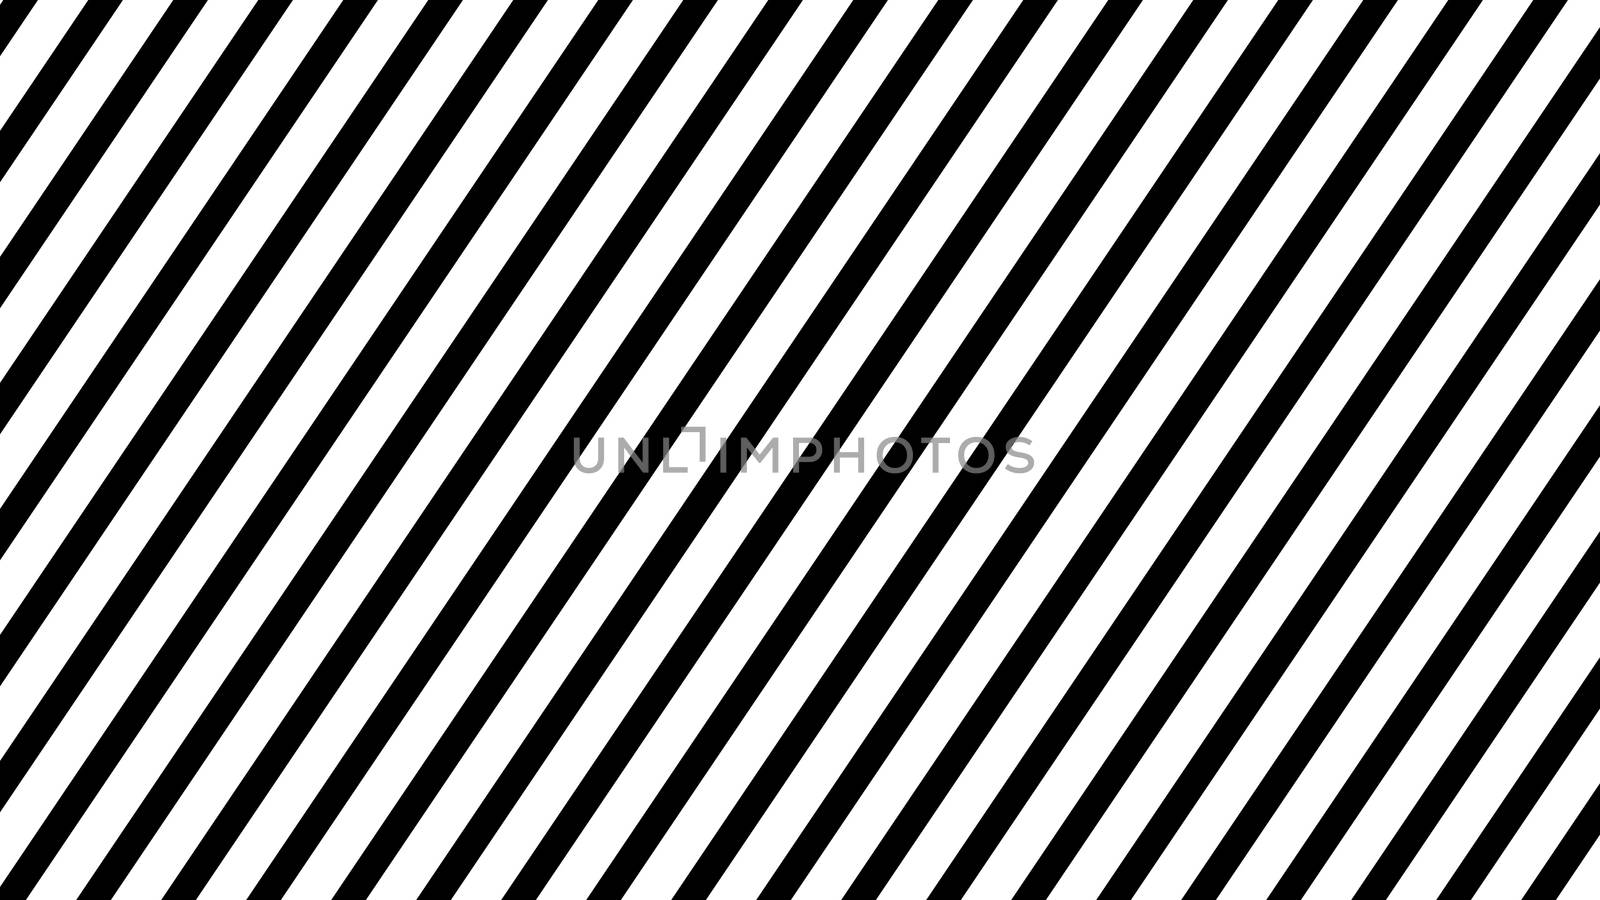 Abstract background with diagonal stripes by nolimit046